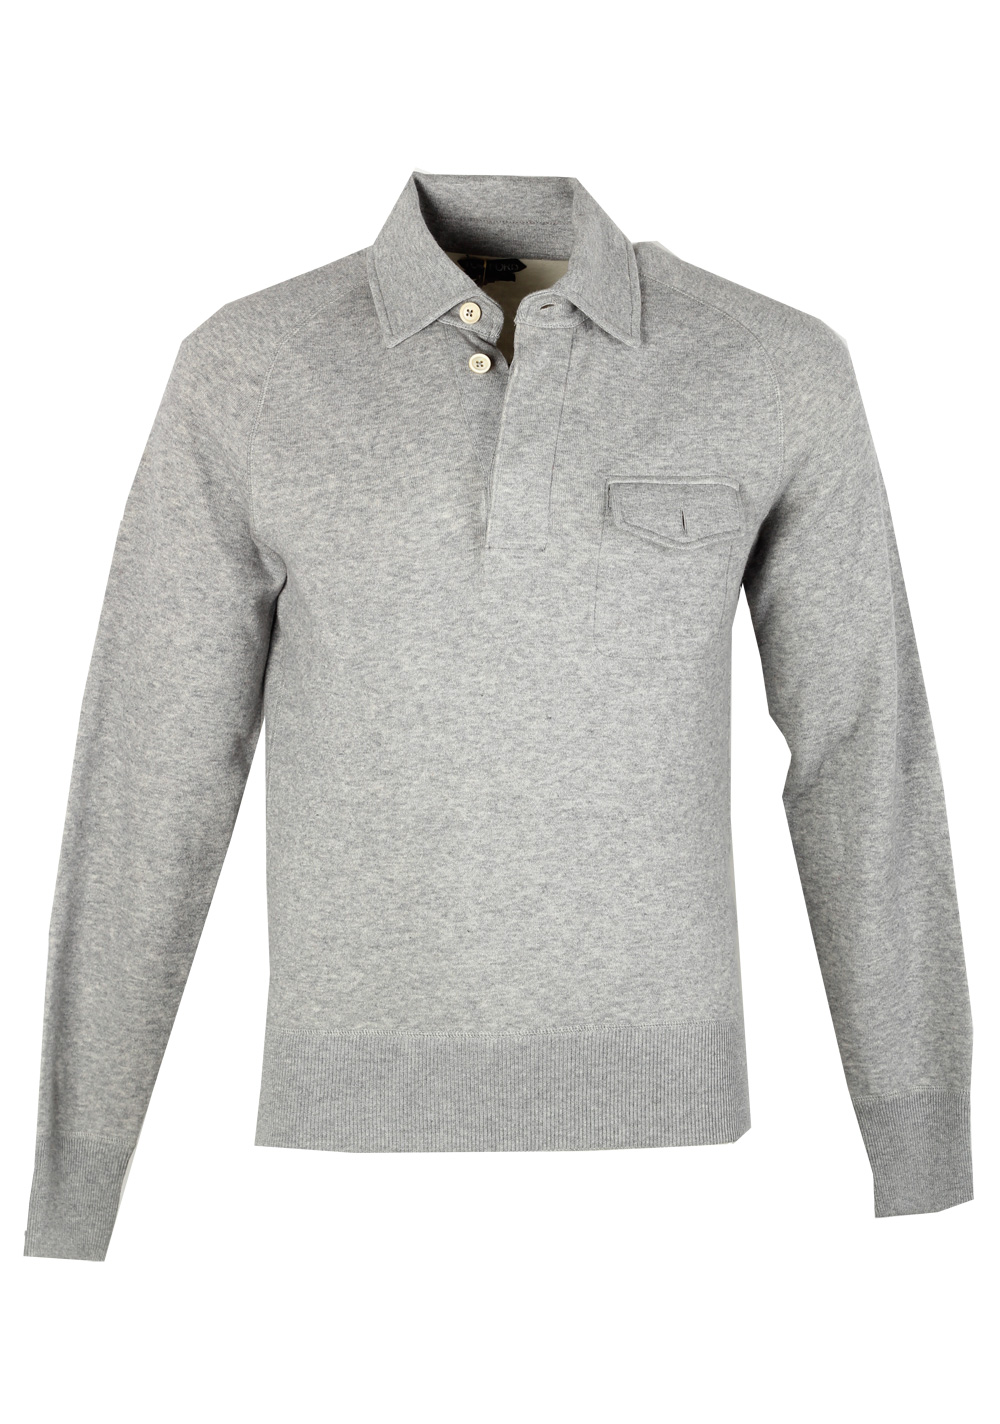 TOM FORD Gray Long Sleeve Jersey Polo Sweater Size 48 / 38R U.S. | Costume Limité